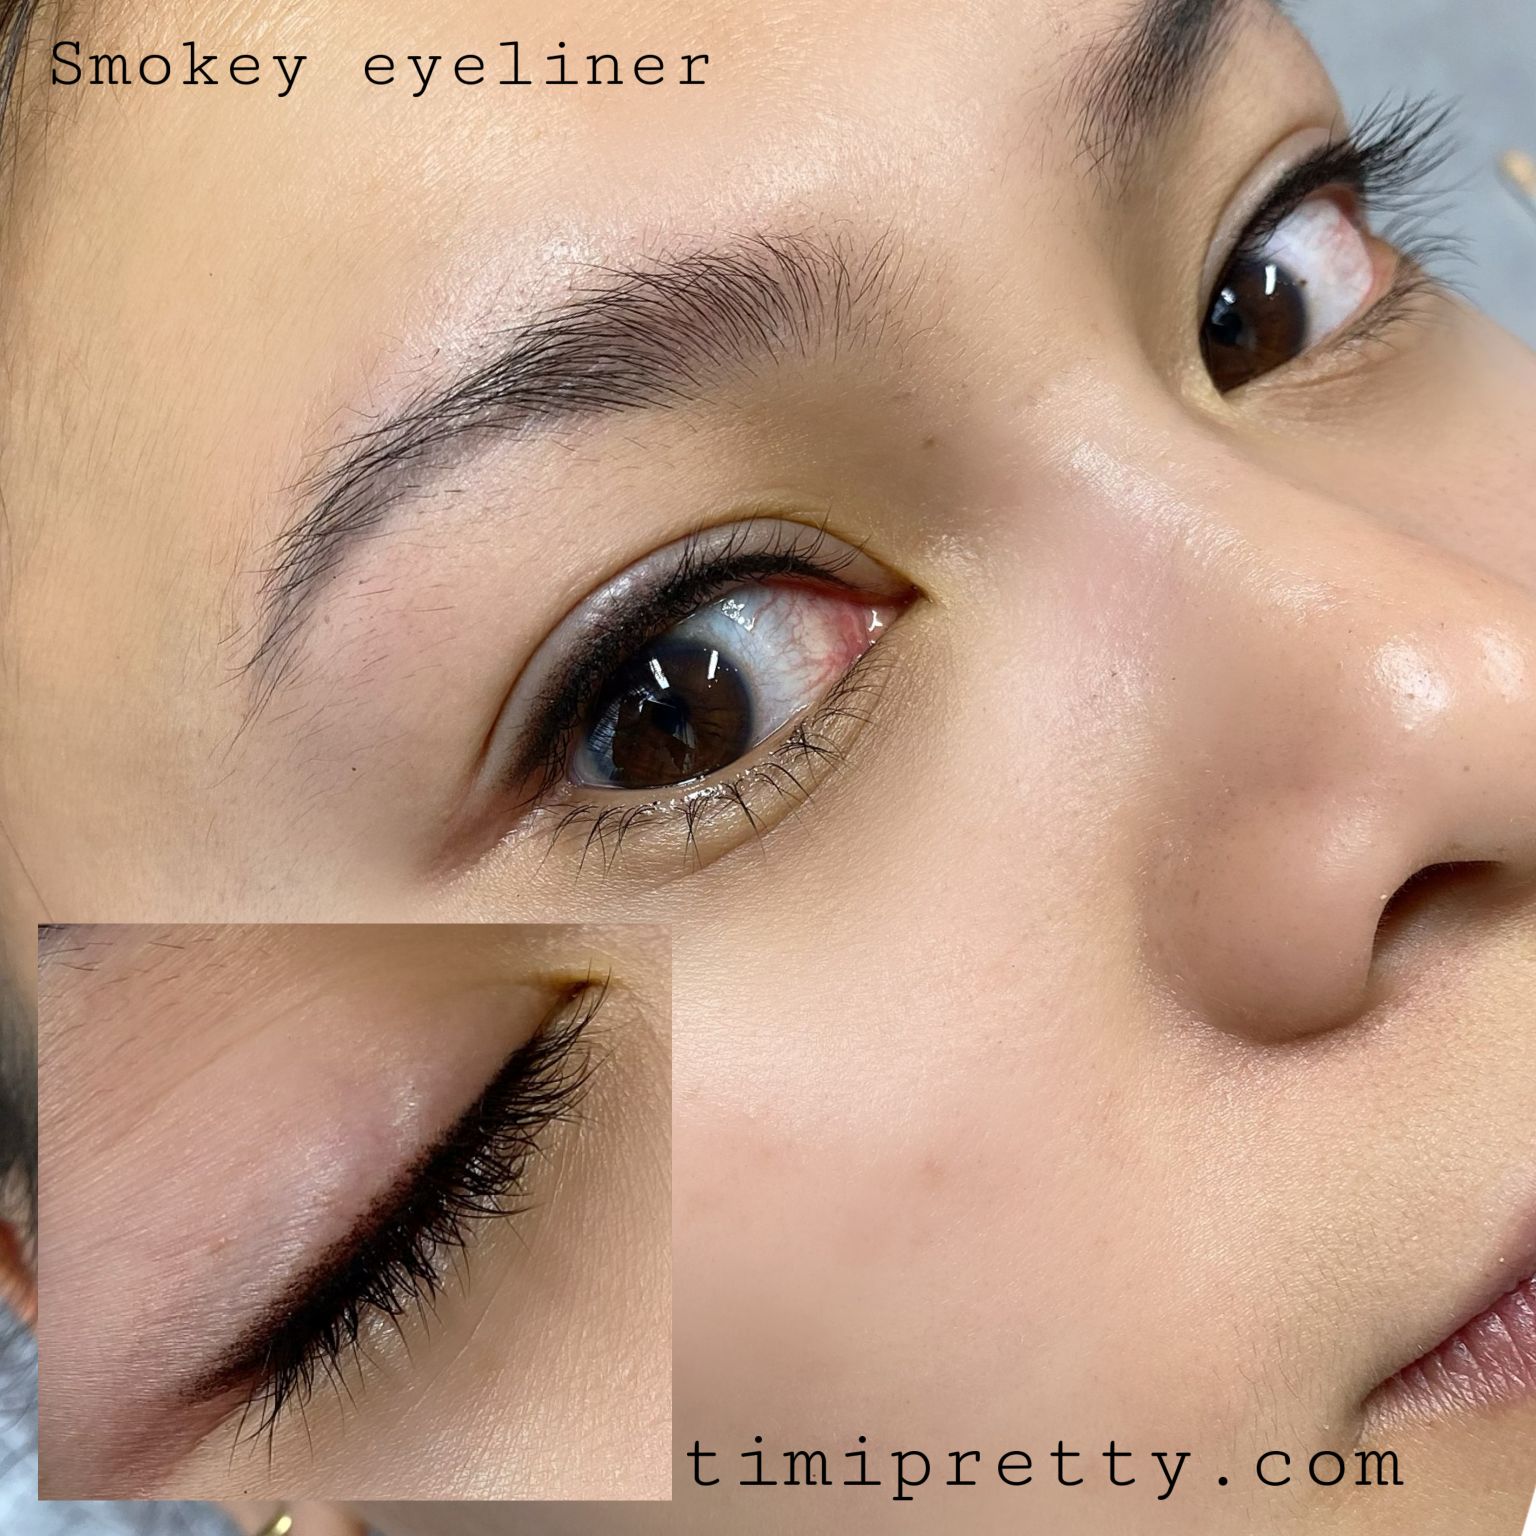 Eyeliner Tattoo Preparation and Aftercare - Lashury